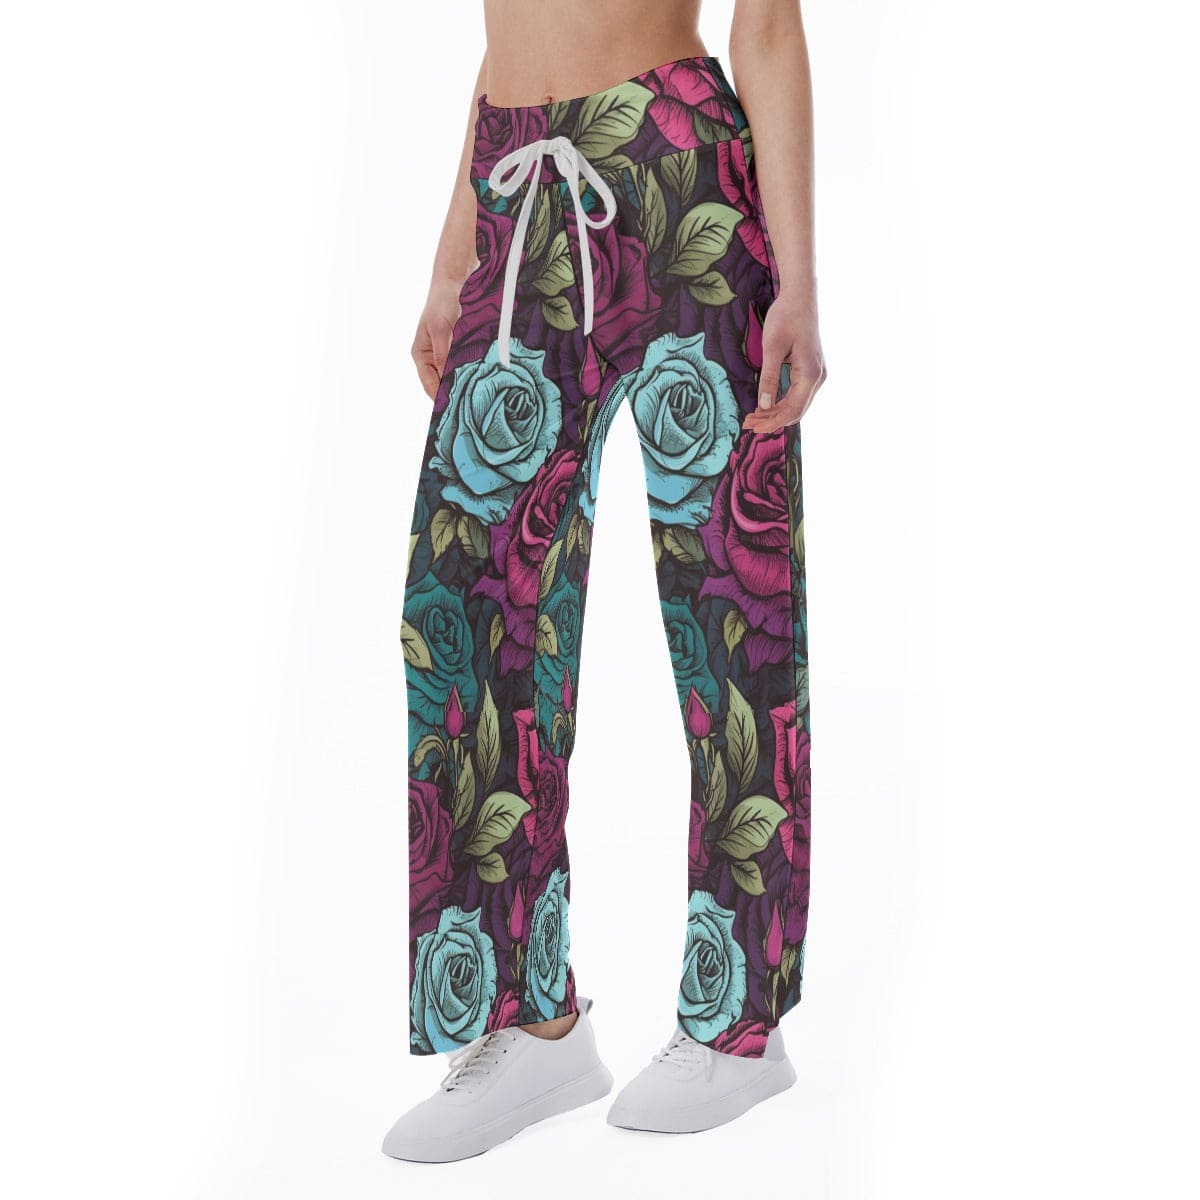 Women's Gothic Floral High-waisted Straight-leg Pants